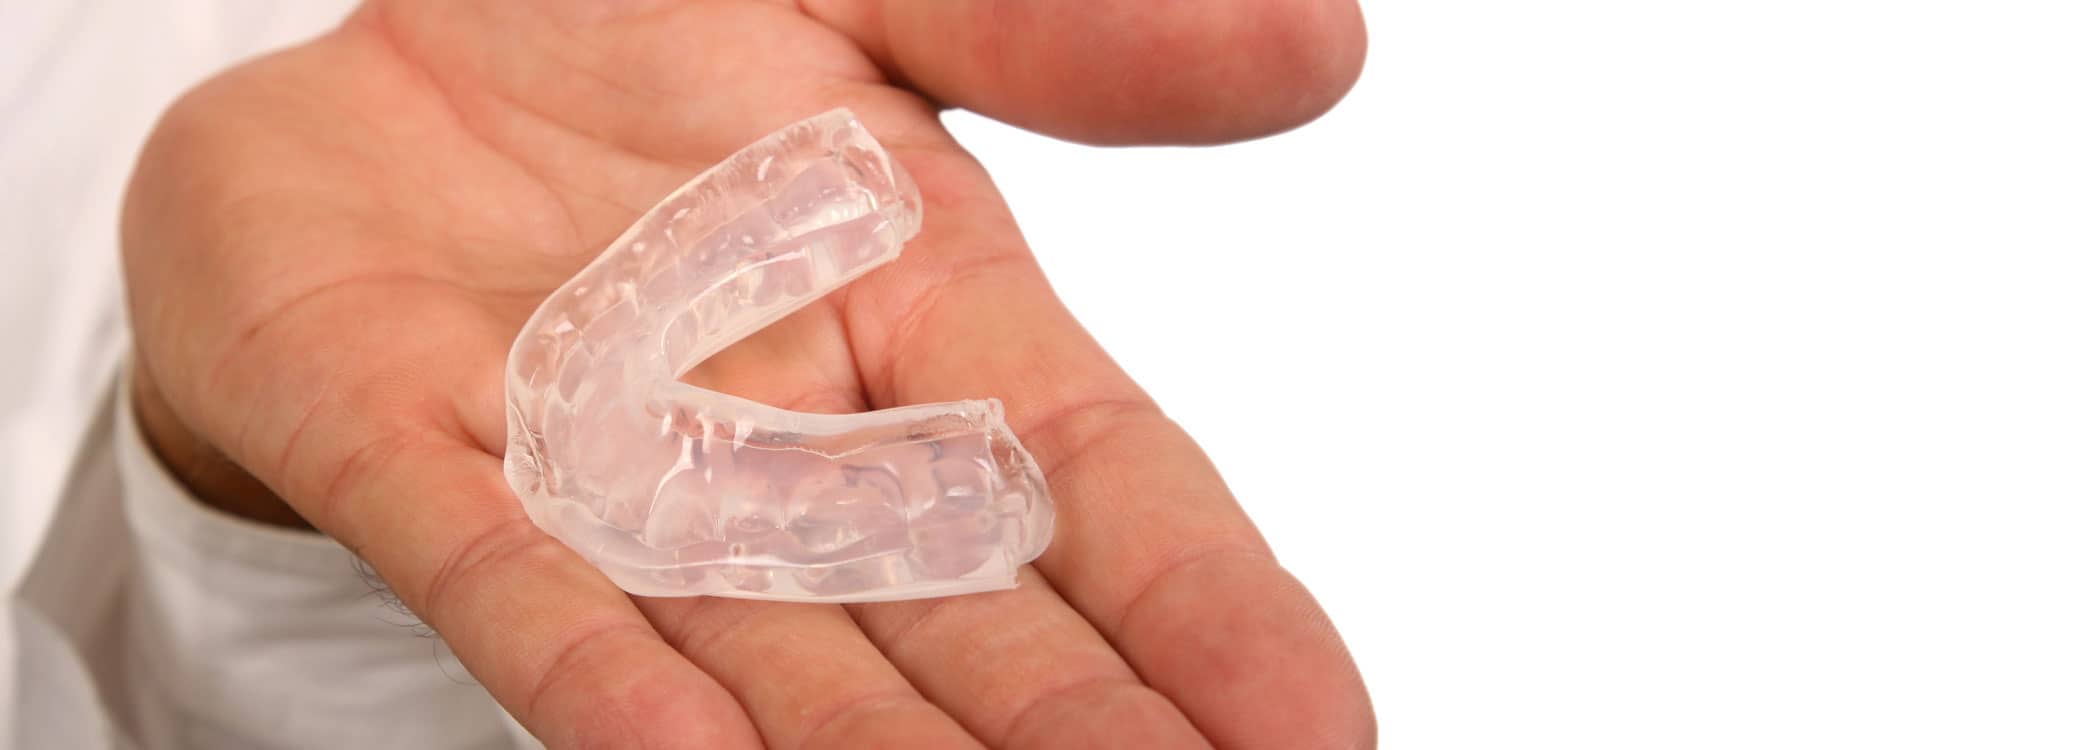 Mouth guard in someone's palm.